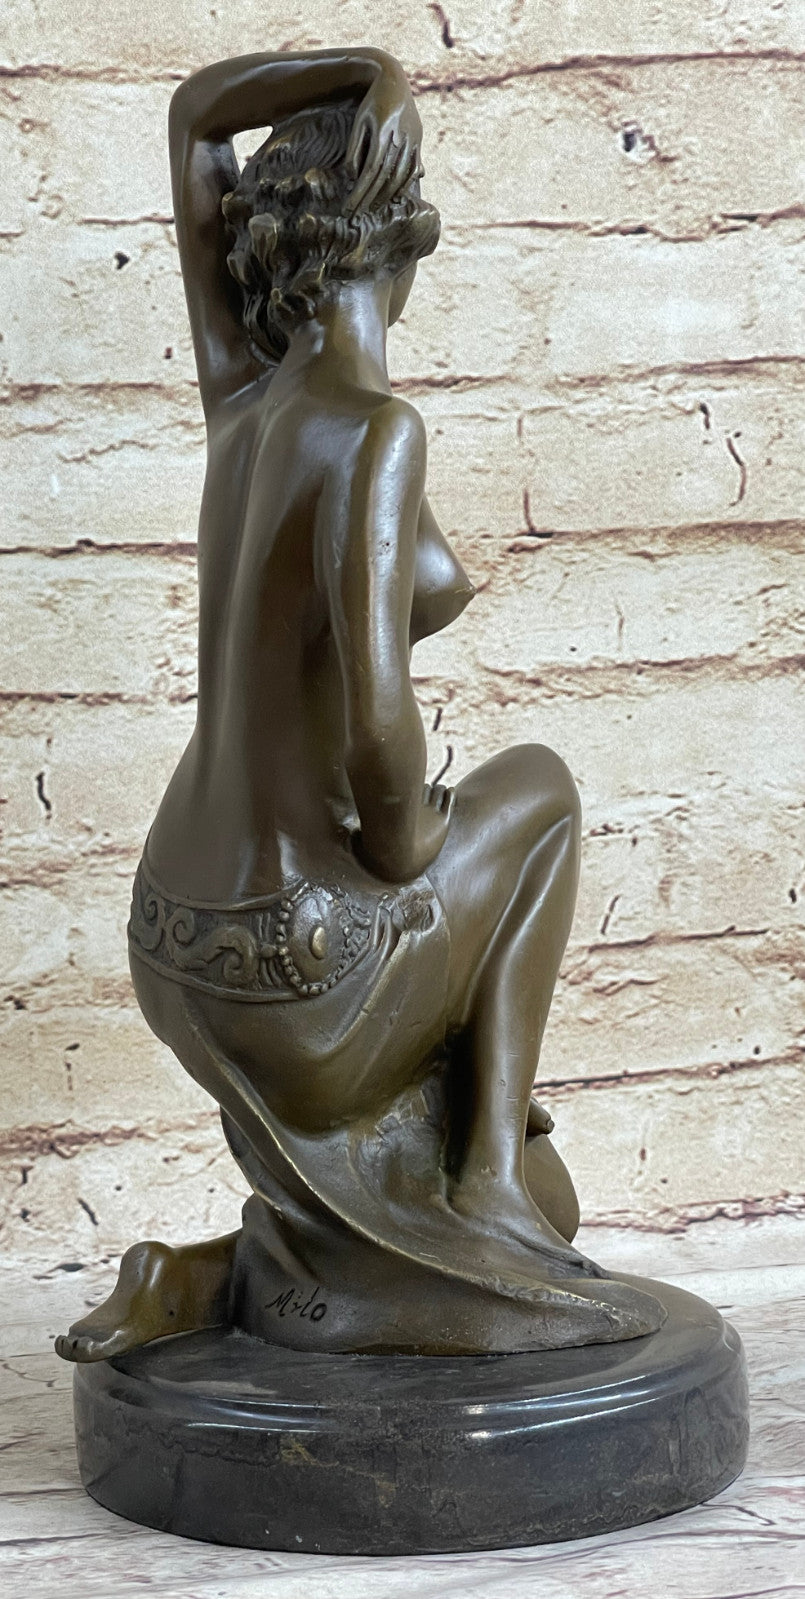 Young Nude Sexy Lady Handcrafted Art Bronze Sculpture Statue Figurine Figure LRG